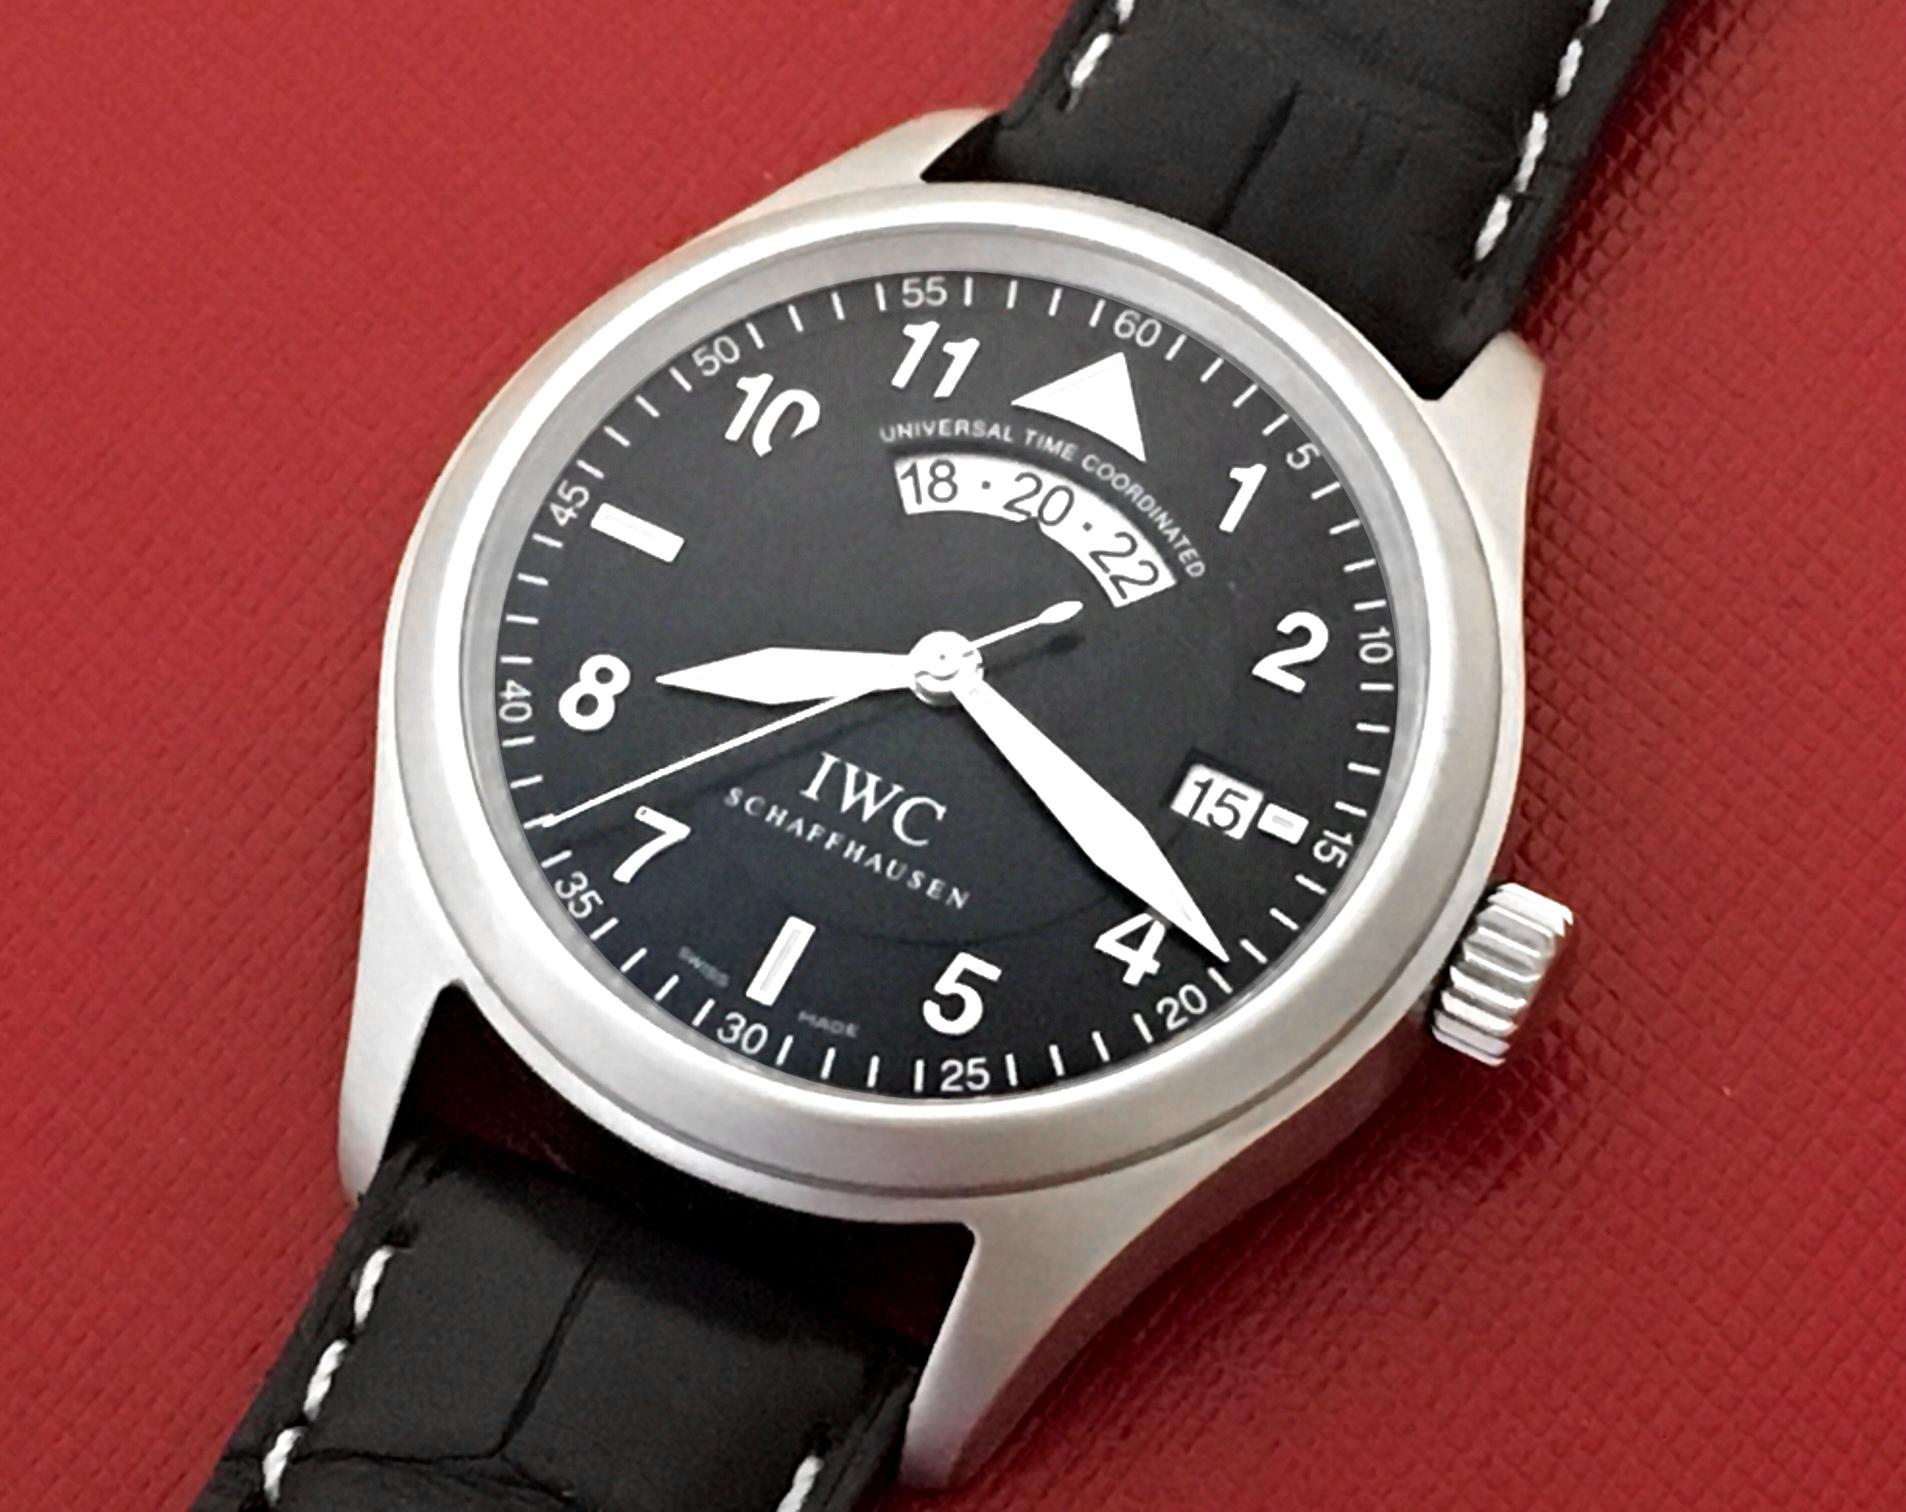 International Watch Company UTC Universal Time Coordinated with 24 Hour Display movement. Model 3251. Certified Pre Owned and ready to ship! Black Dial with polished markers and Arabic numerals and Stainless Steel waterproof style case (39mm dia.).